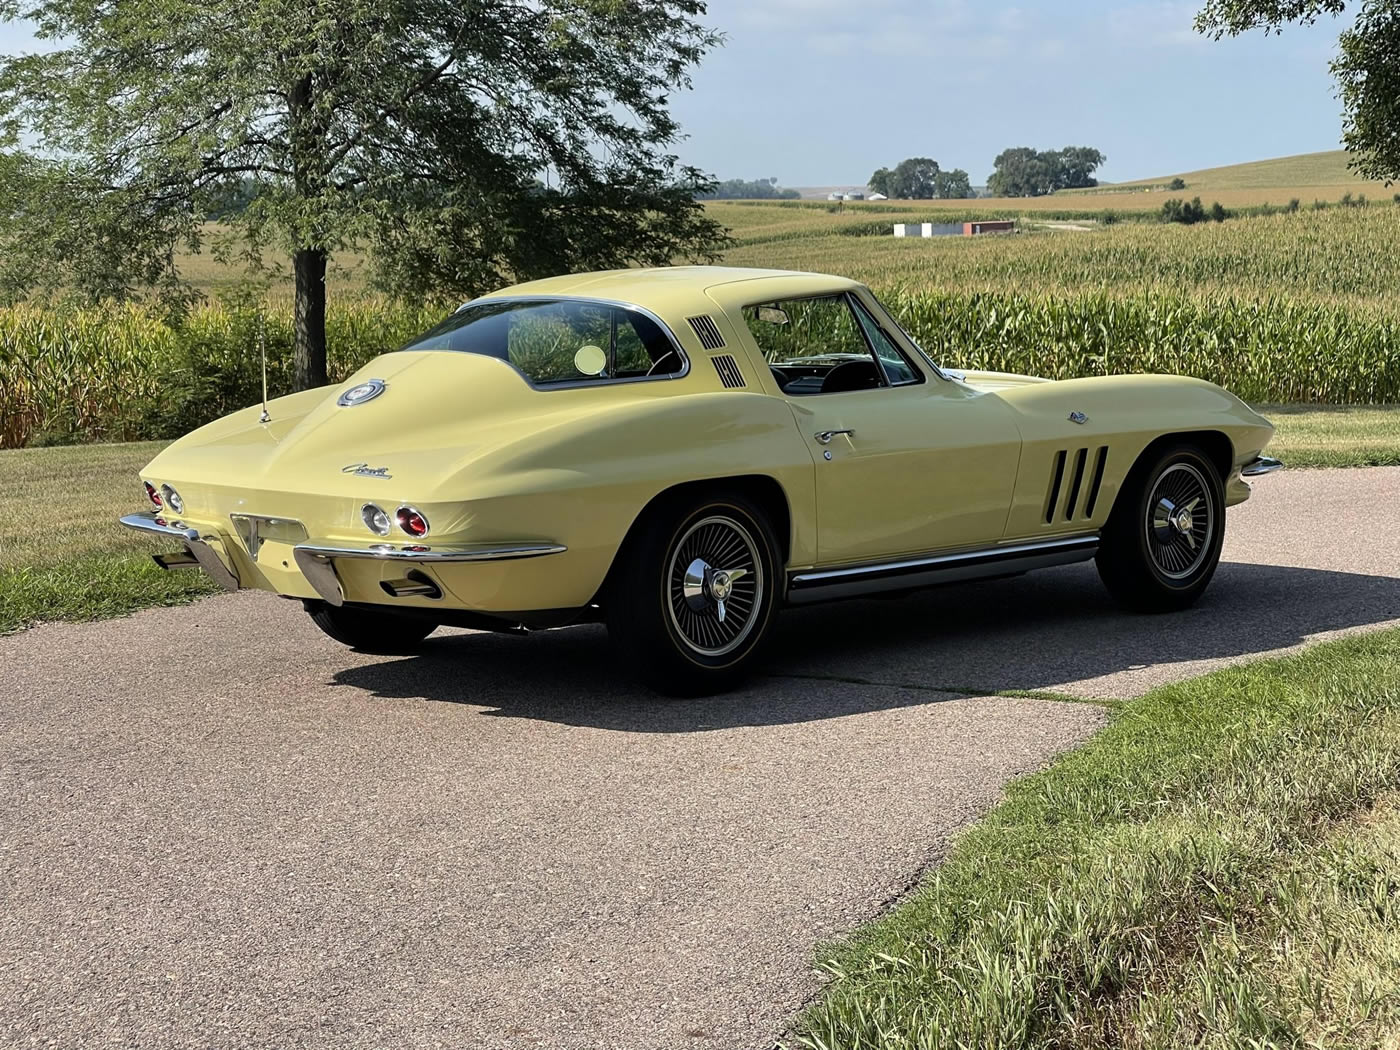 1965 Corvette Coupe L76 327/365 4-Speed in Goldwood Yellow